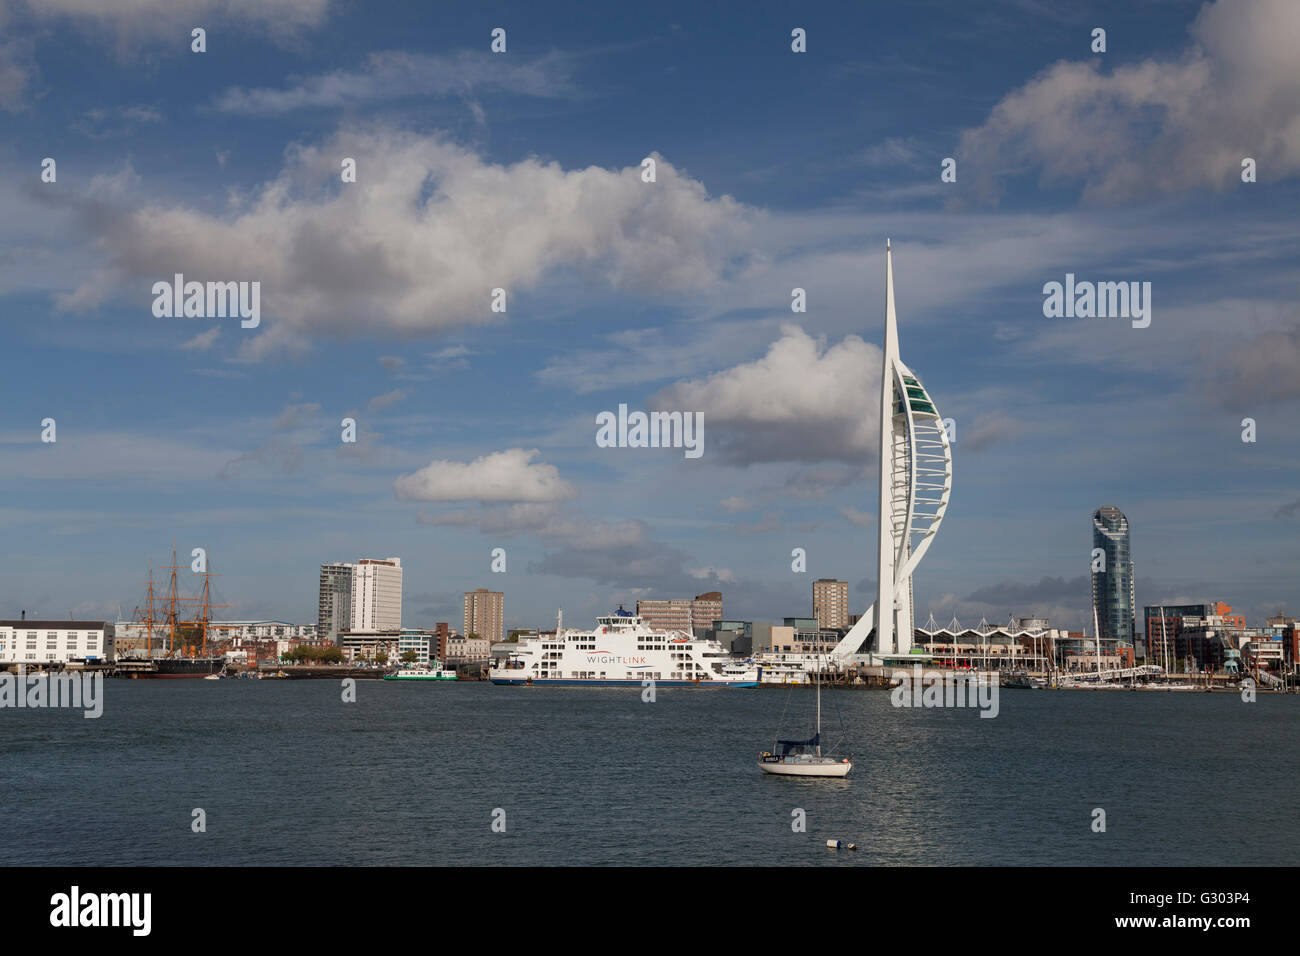 Portsmouth harbour frontage with Spinnaker Tower, Portsmouth, England, United Kingdom, Europe Stock Photo